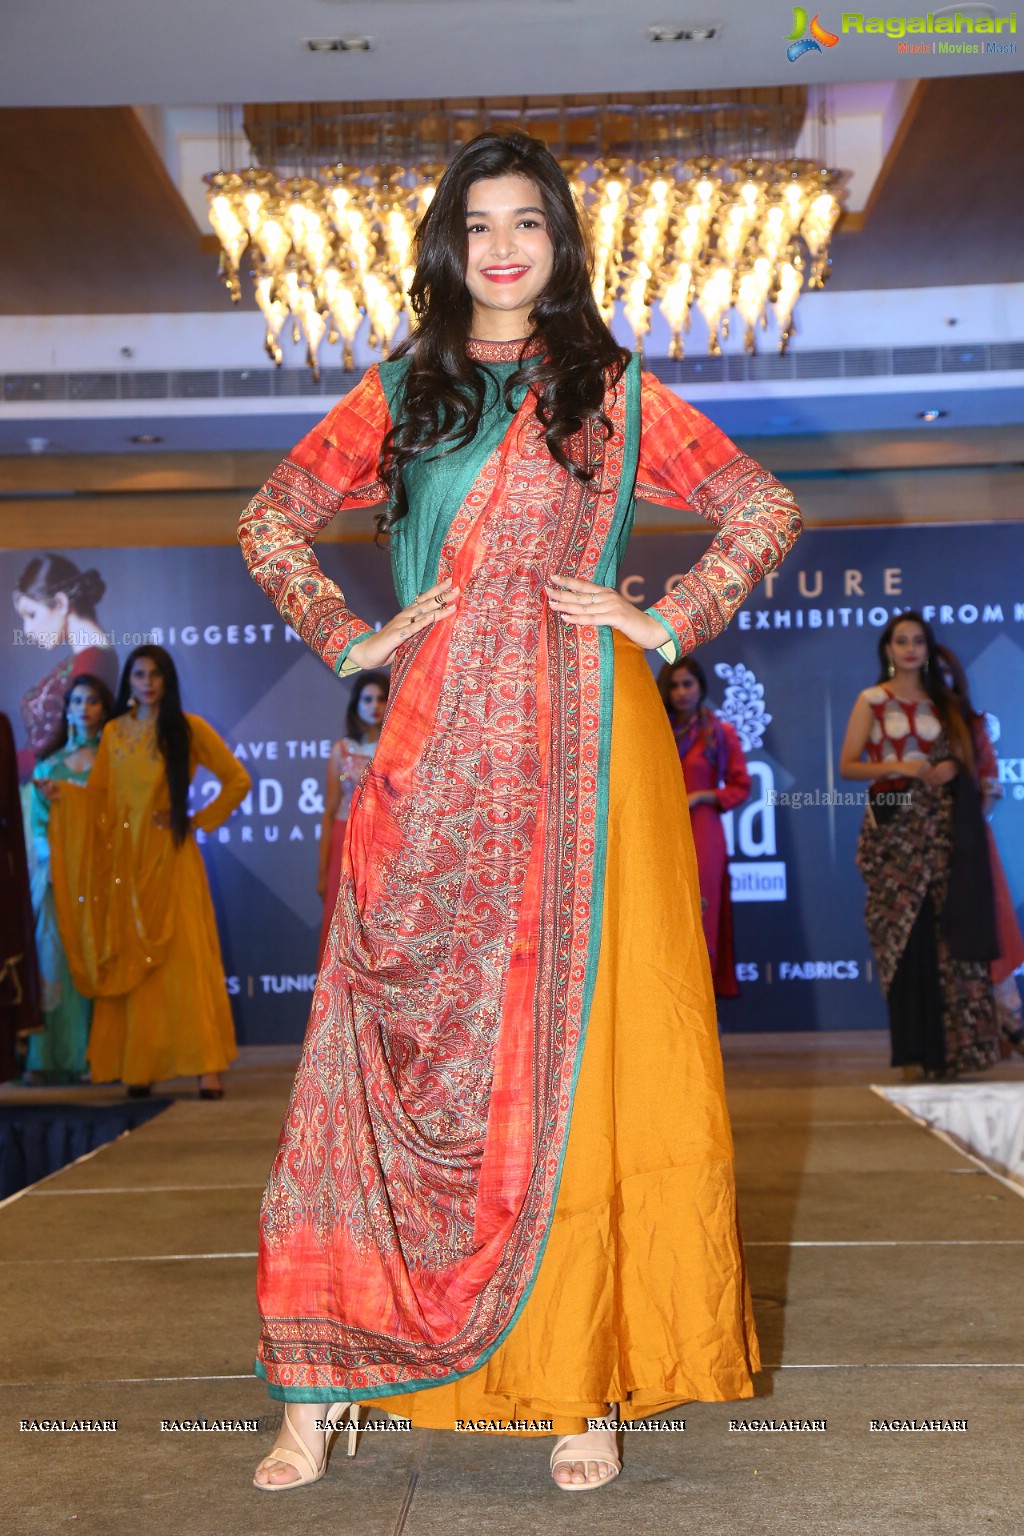 Grand Fashion Show by Sutraa Designer Fashion Exhibition at Marigold by GreenPark